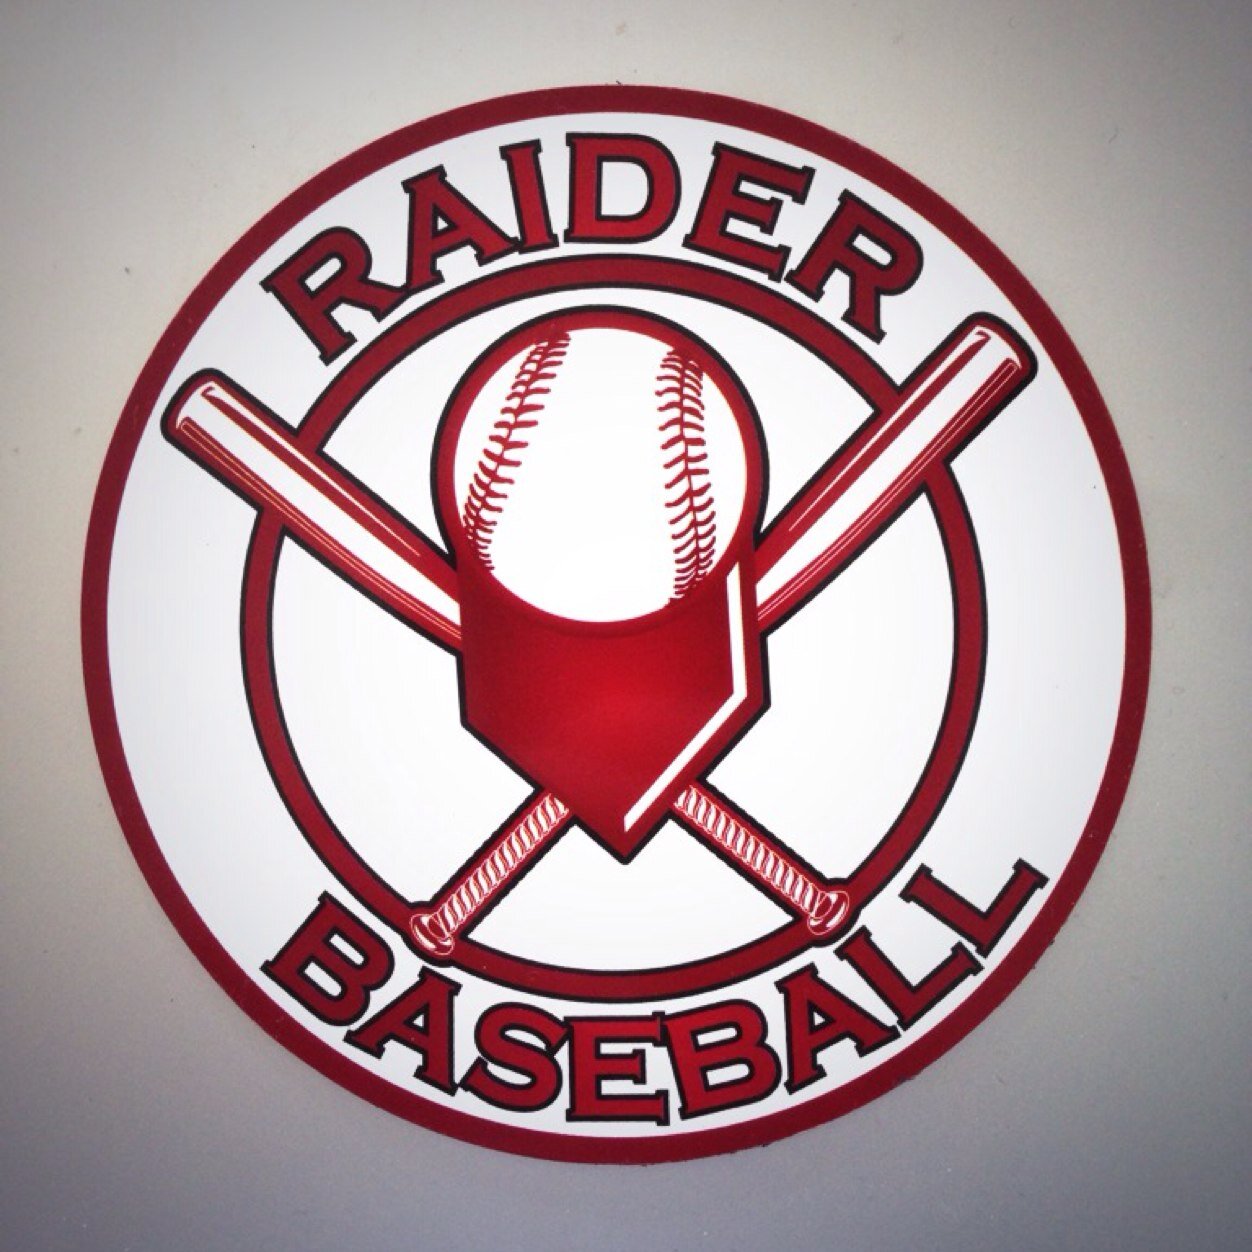 Scarsdale High School Varsity Baseball. Schedule, score updates and news about the team.